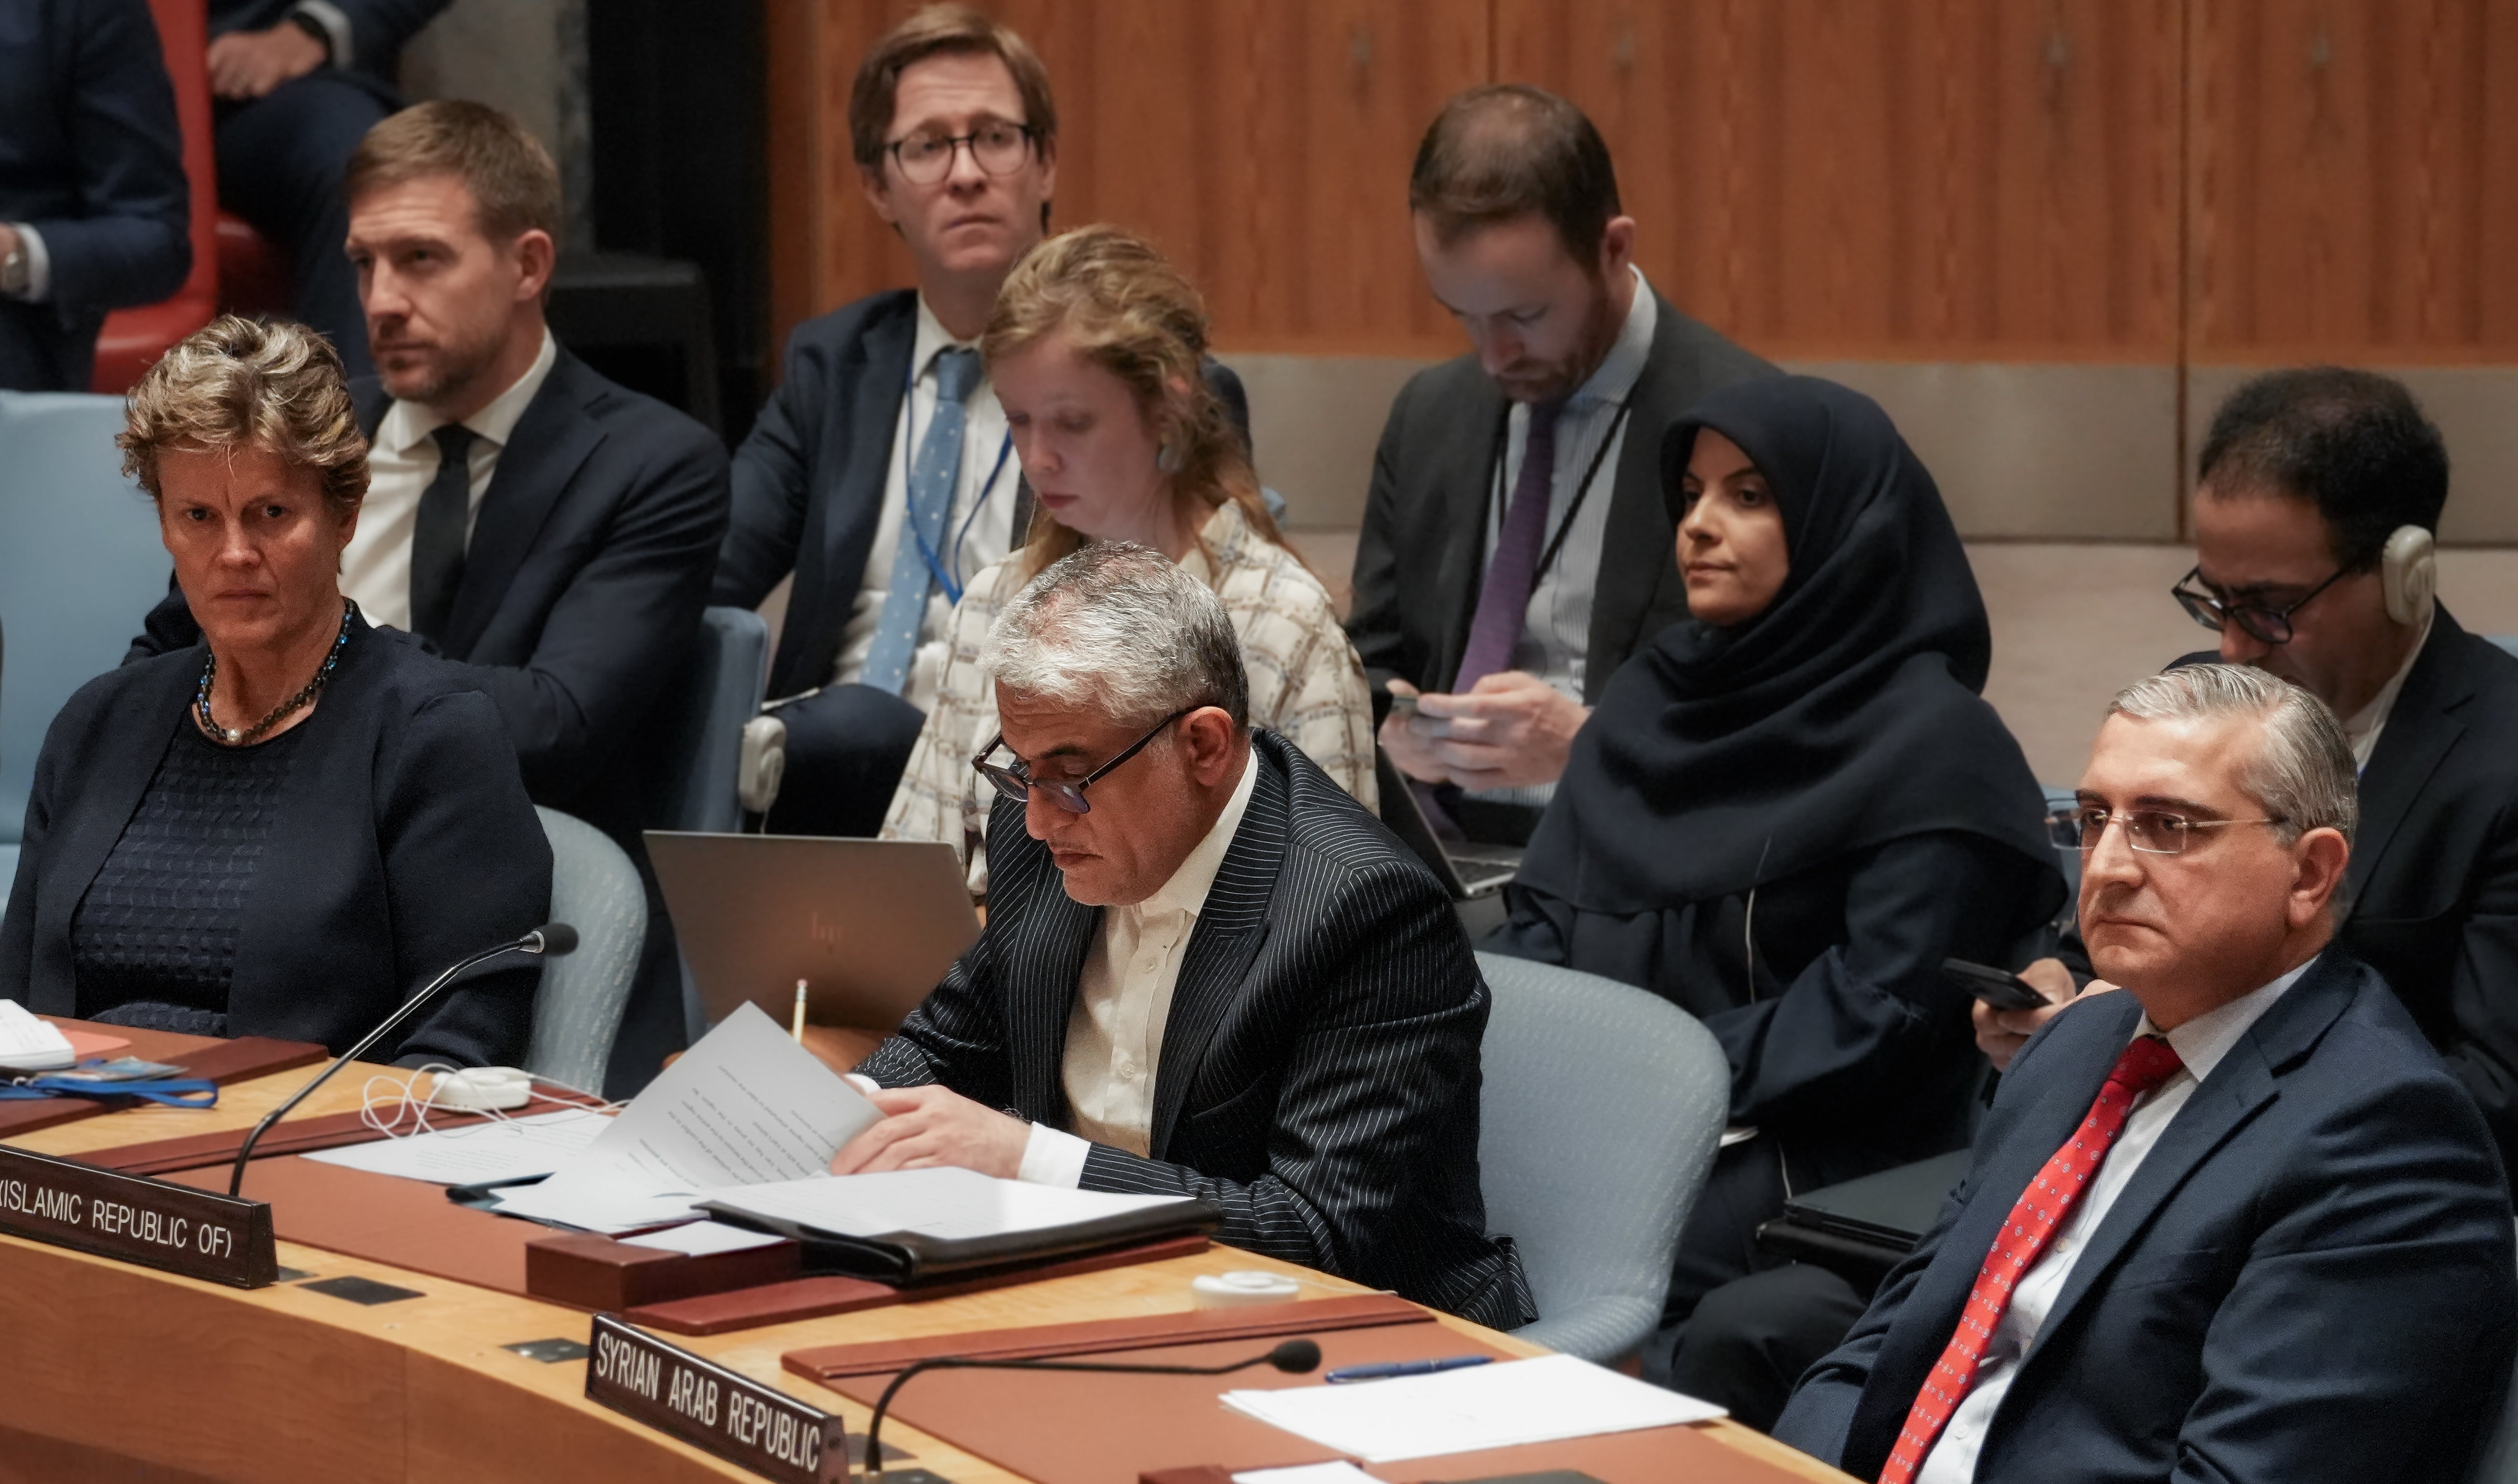 Islamic Republic of Iran Ambassador Amir Saeid Iravani reads a speech to members of the Security Council at United Nations